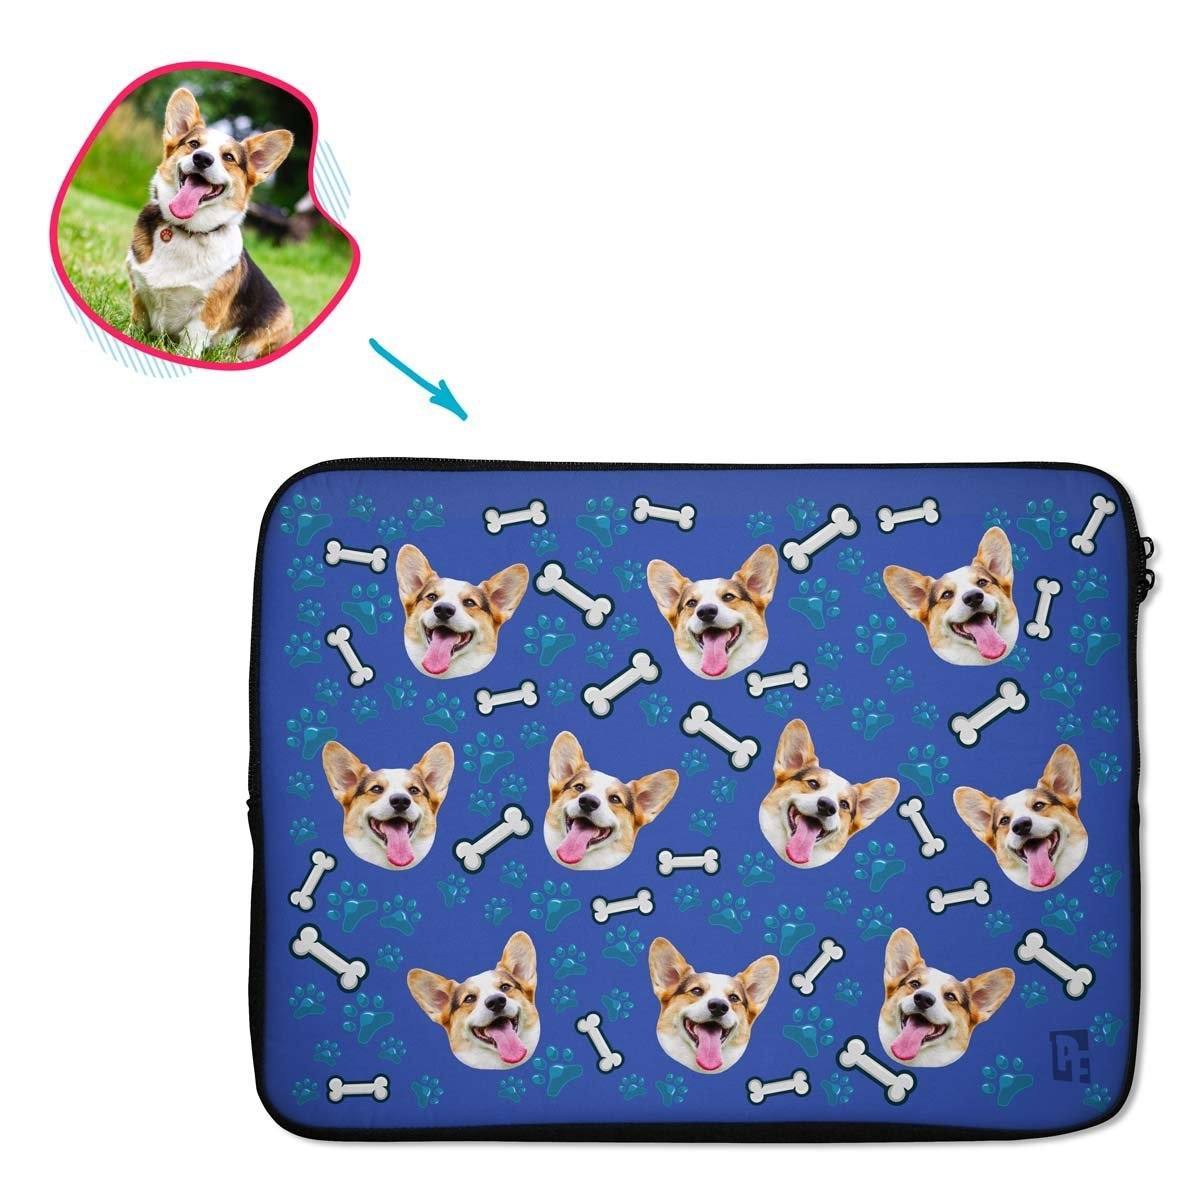 darkblue Dog laptop sleeve personalized with photo of face printed on them